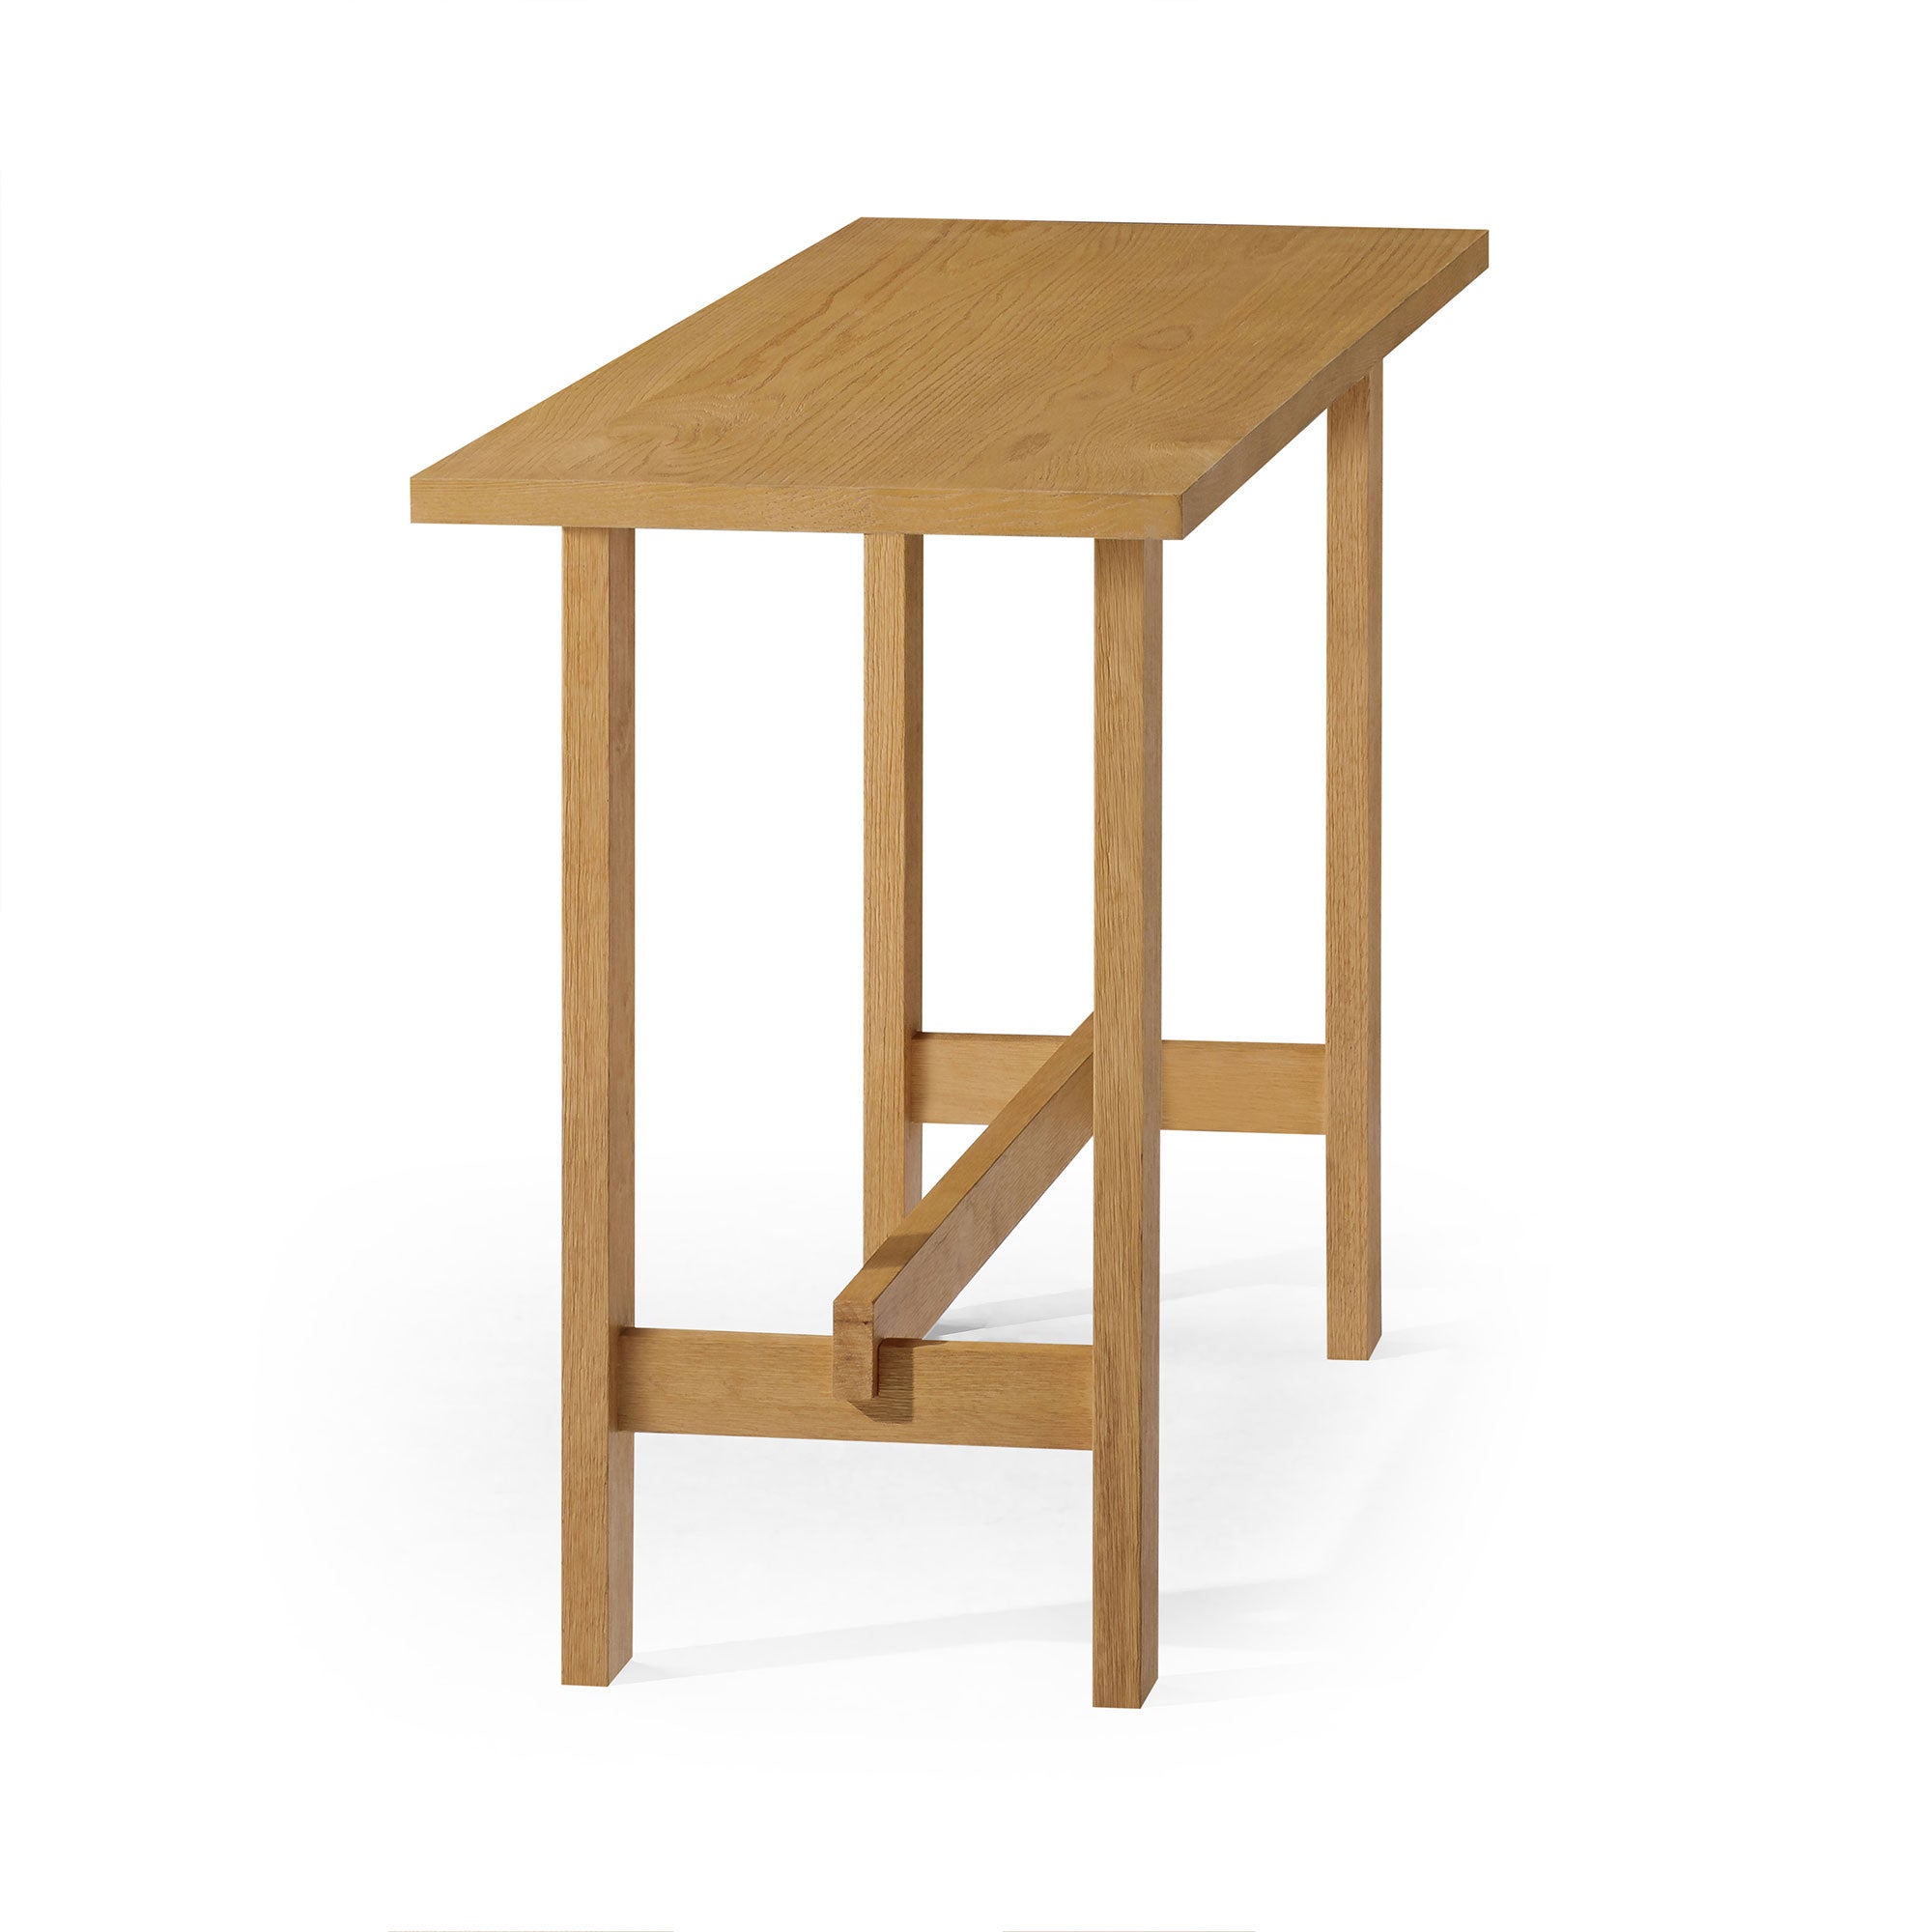 Hera Organic Wooden Console Table in Weathered Natural Finish in Accent Tables by Maven Lane